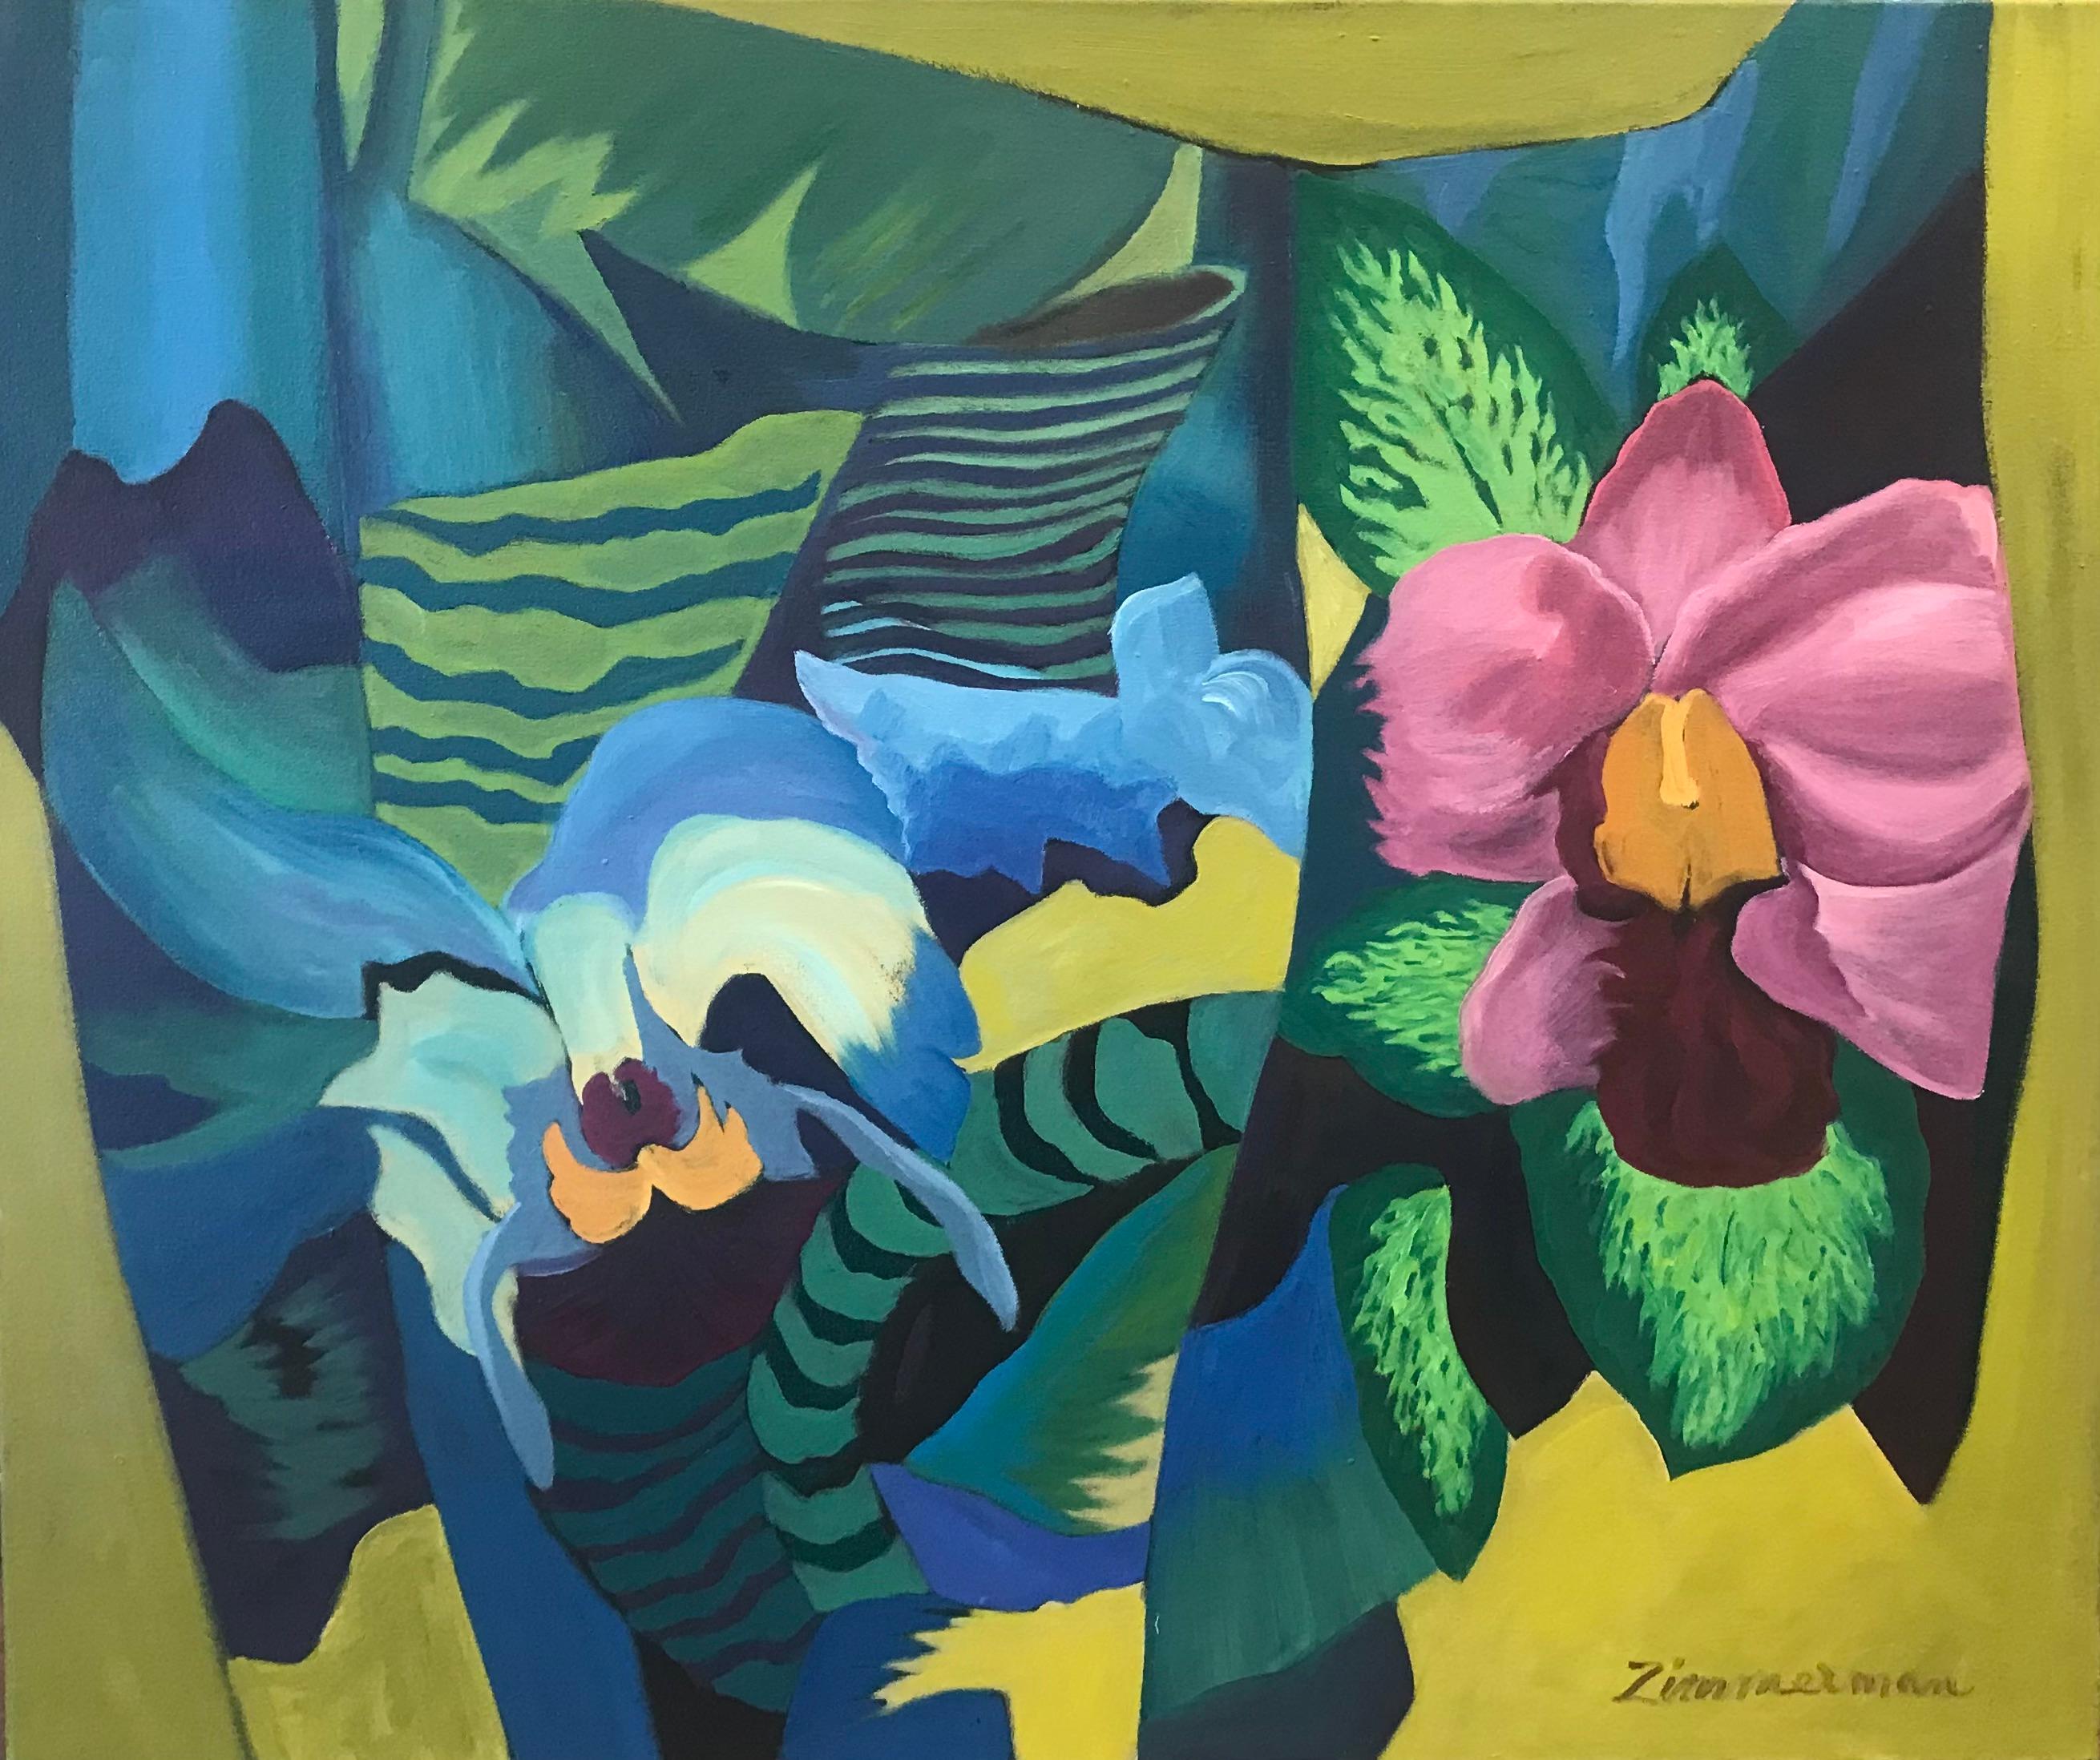 Vibrant cool colors suggesting botanicals, with warm orchids accenting the abstraction. A fusion of abstraction and realism.

Orchid Abstraction - Abstract Painting - Oil On Canvas By Marc Zimmerman


Marc Zimmerman creates playful paintings,